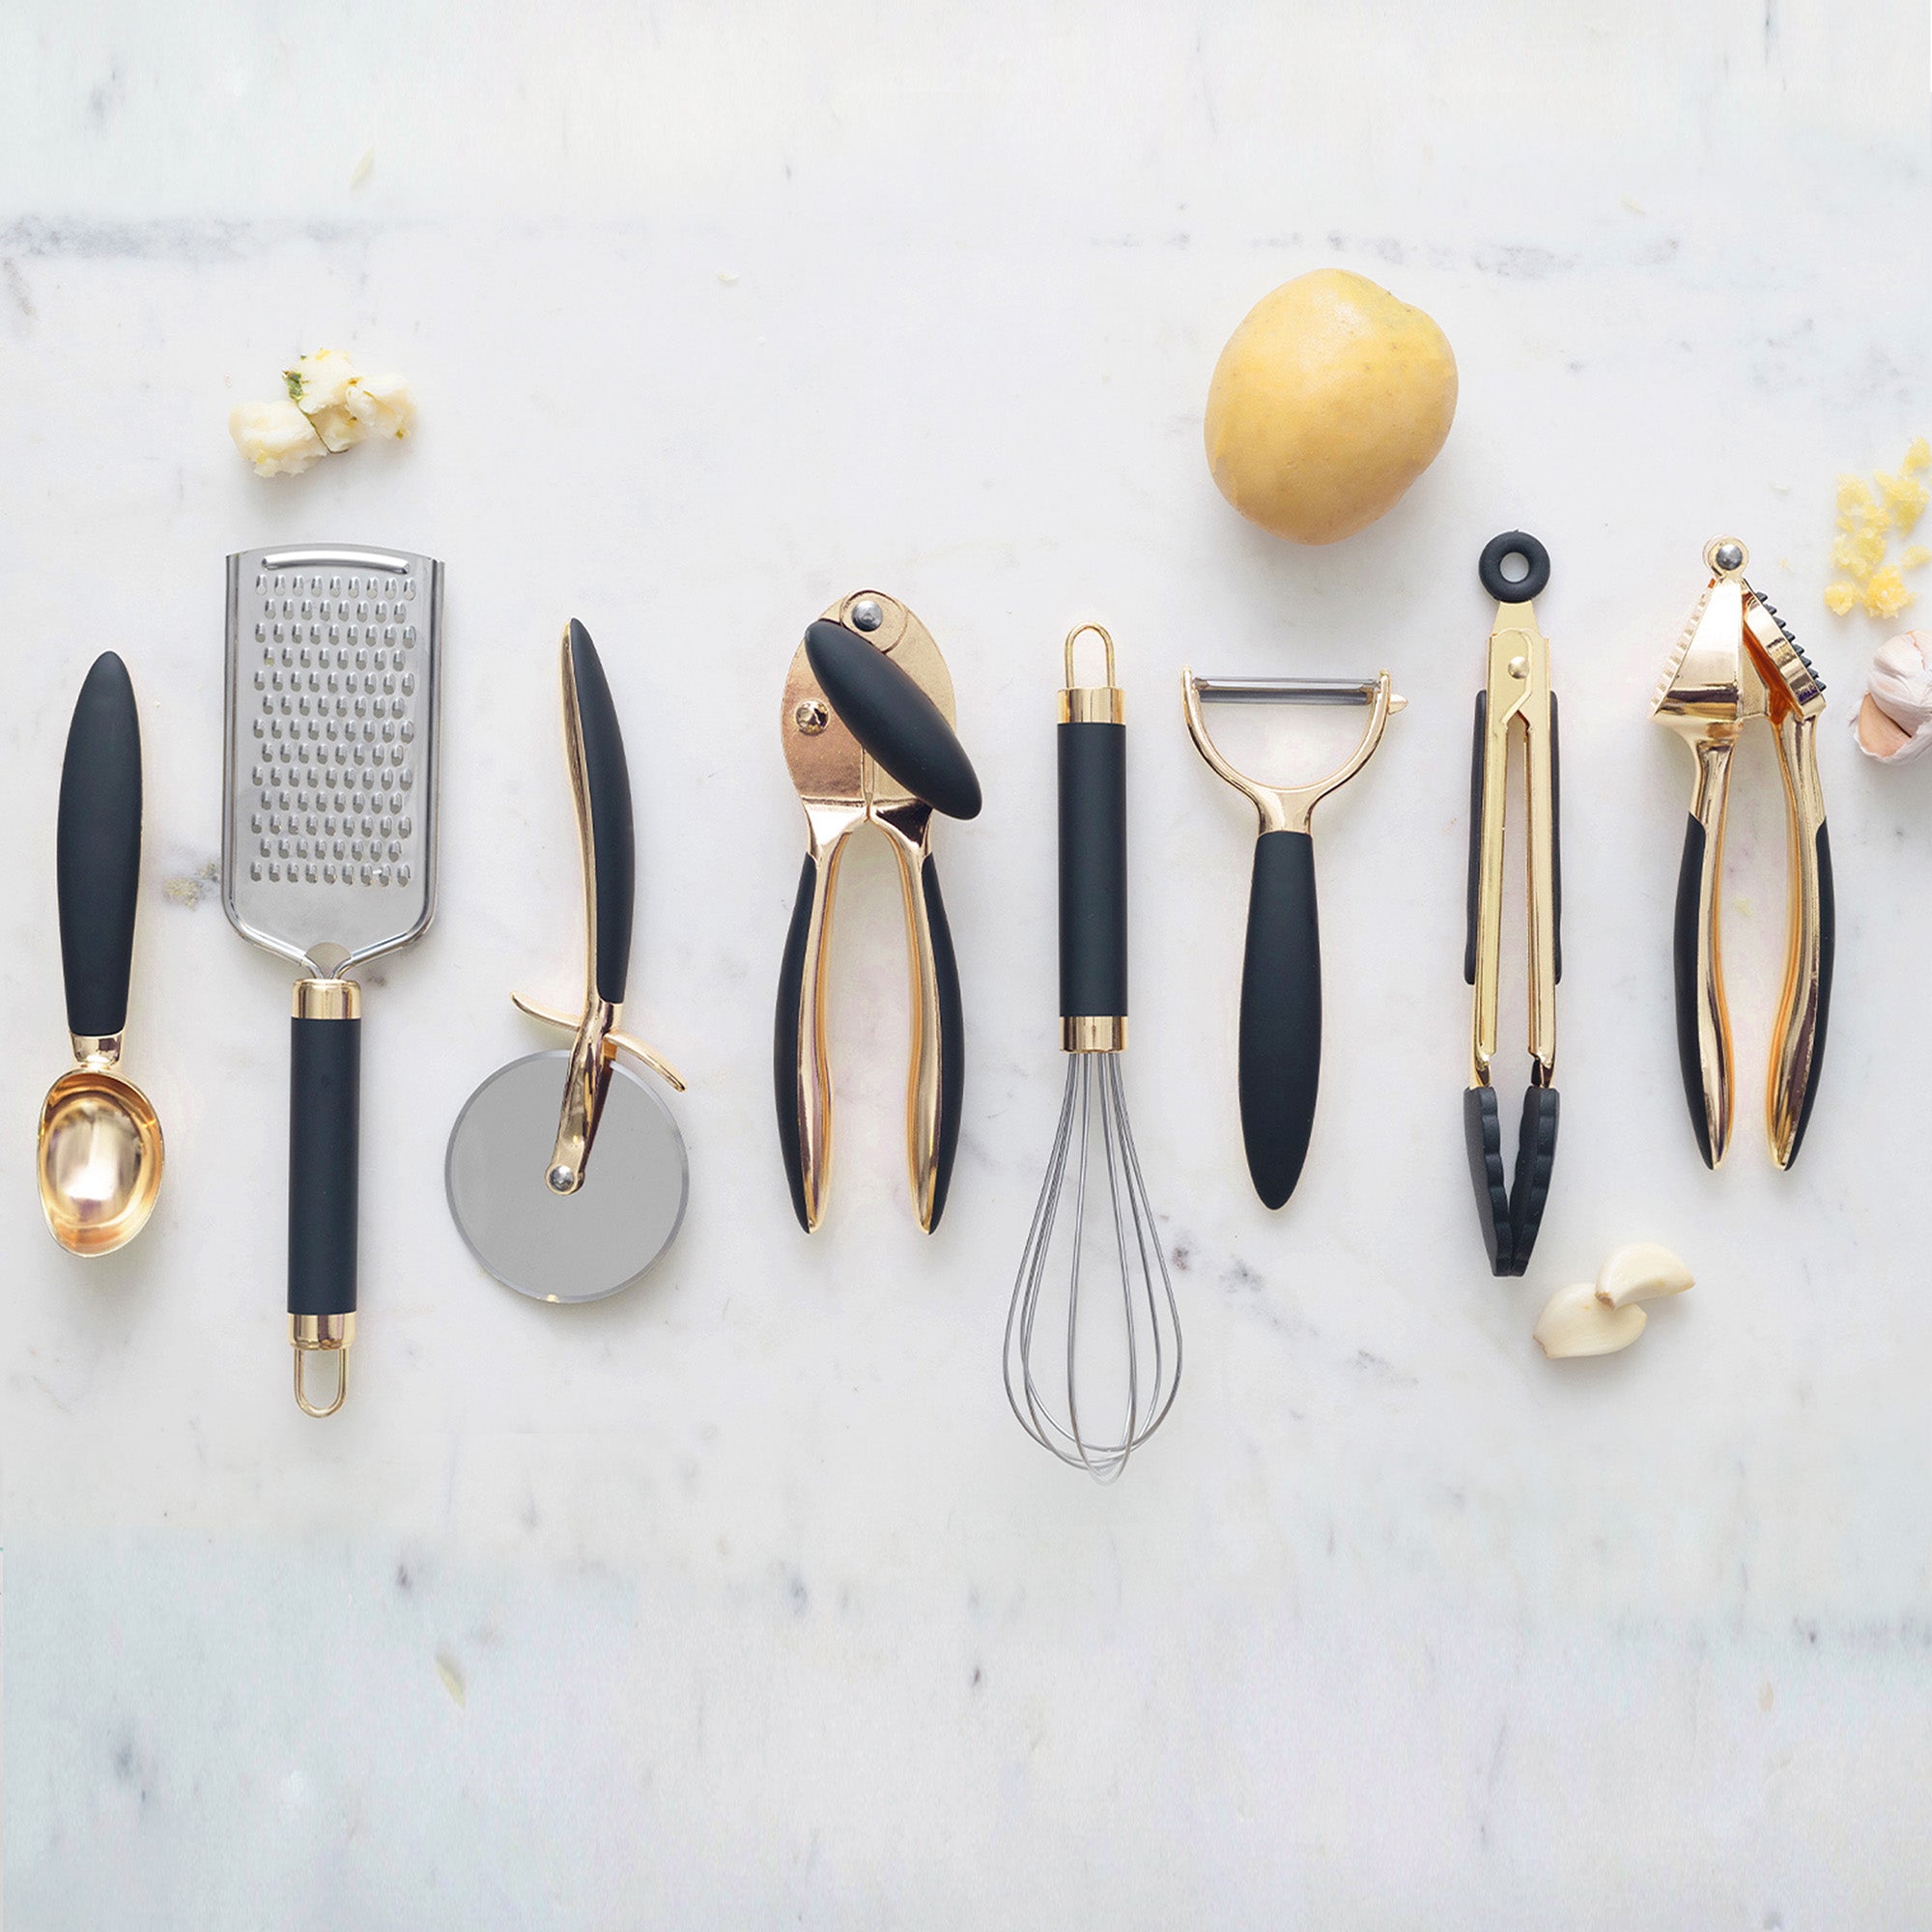 Black and Gold Kitchen Tool Set - Styled Settings